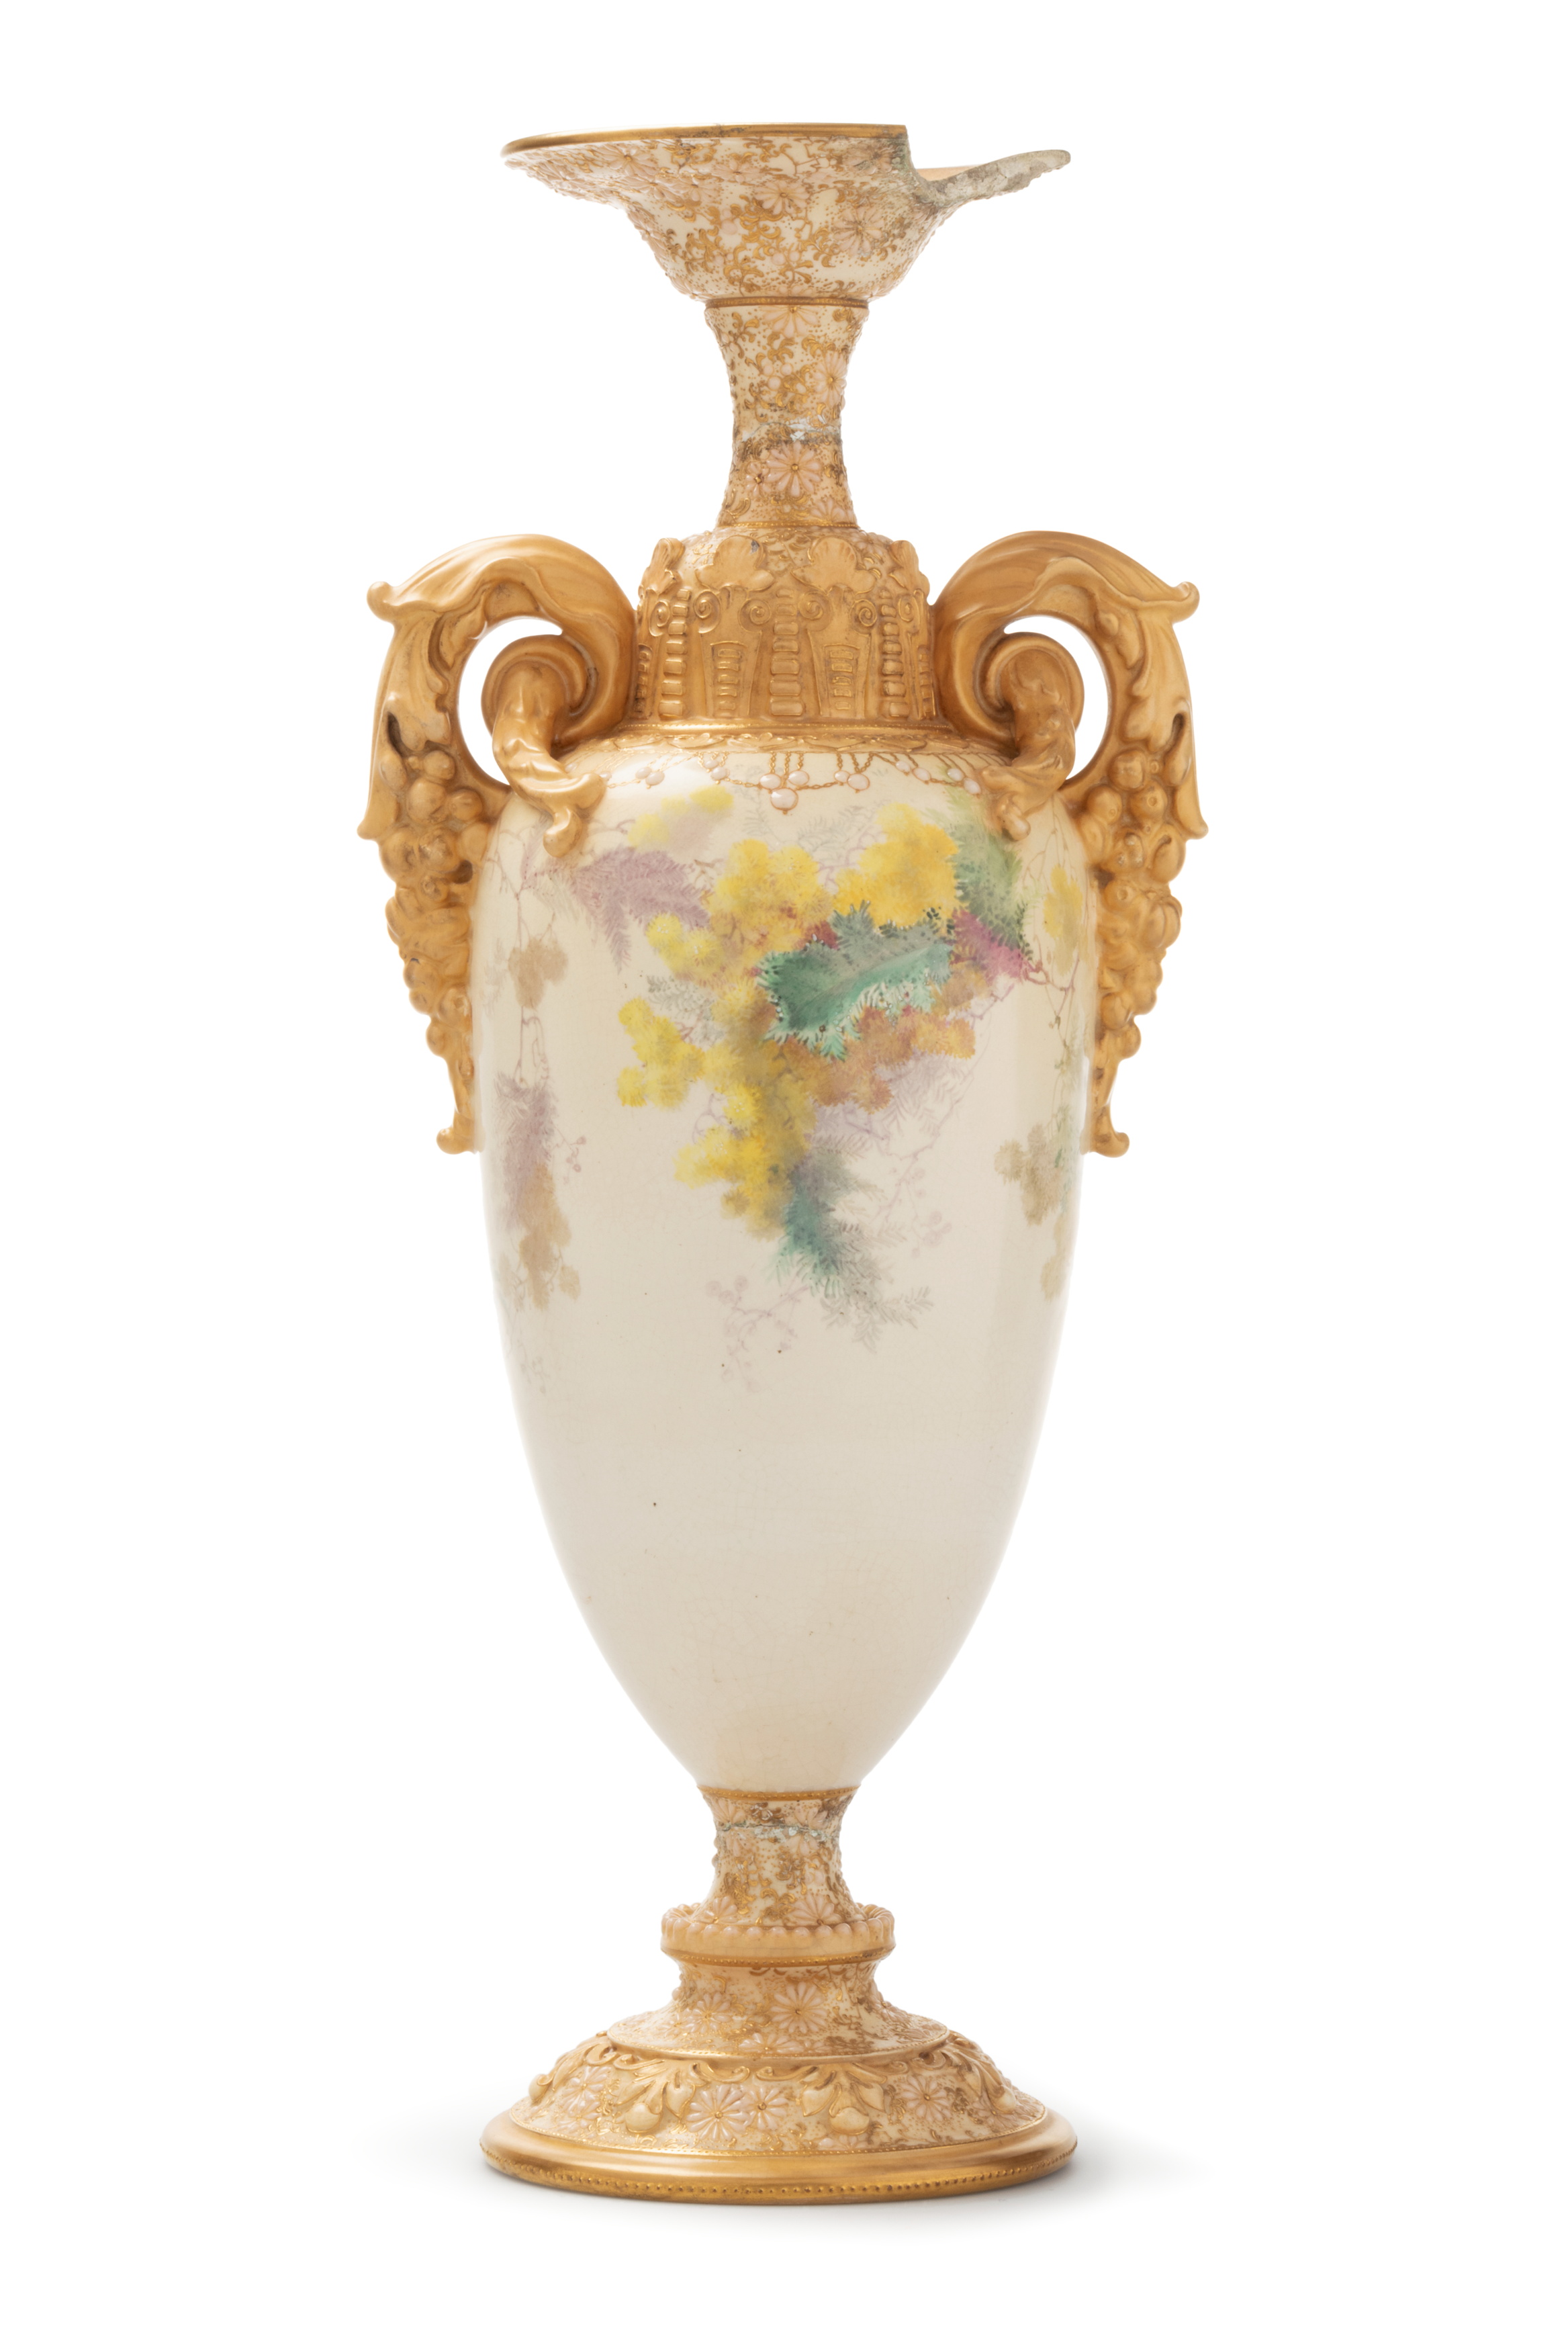 Vase by Royal Doulton for the World's Columbian Exposition